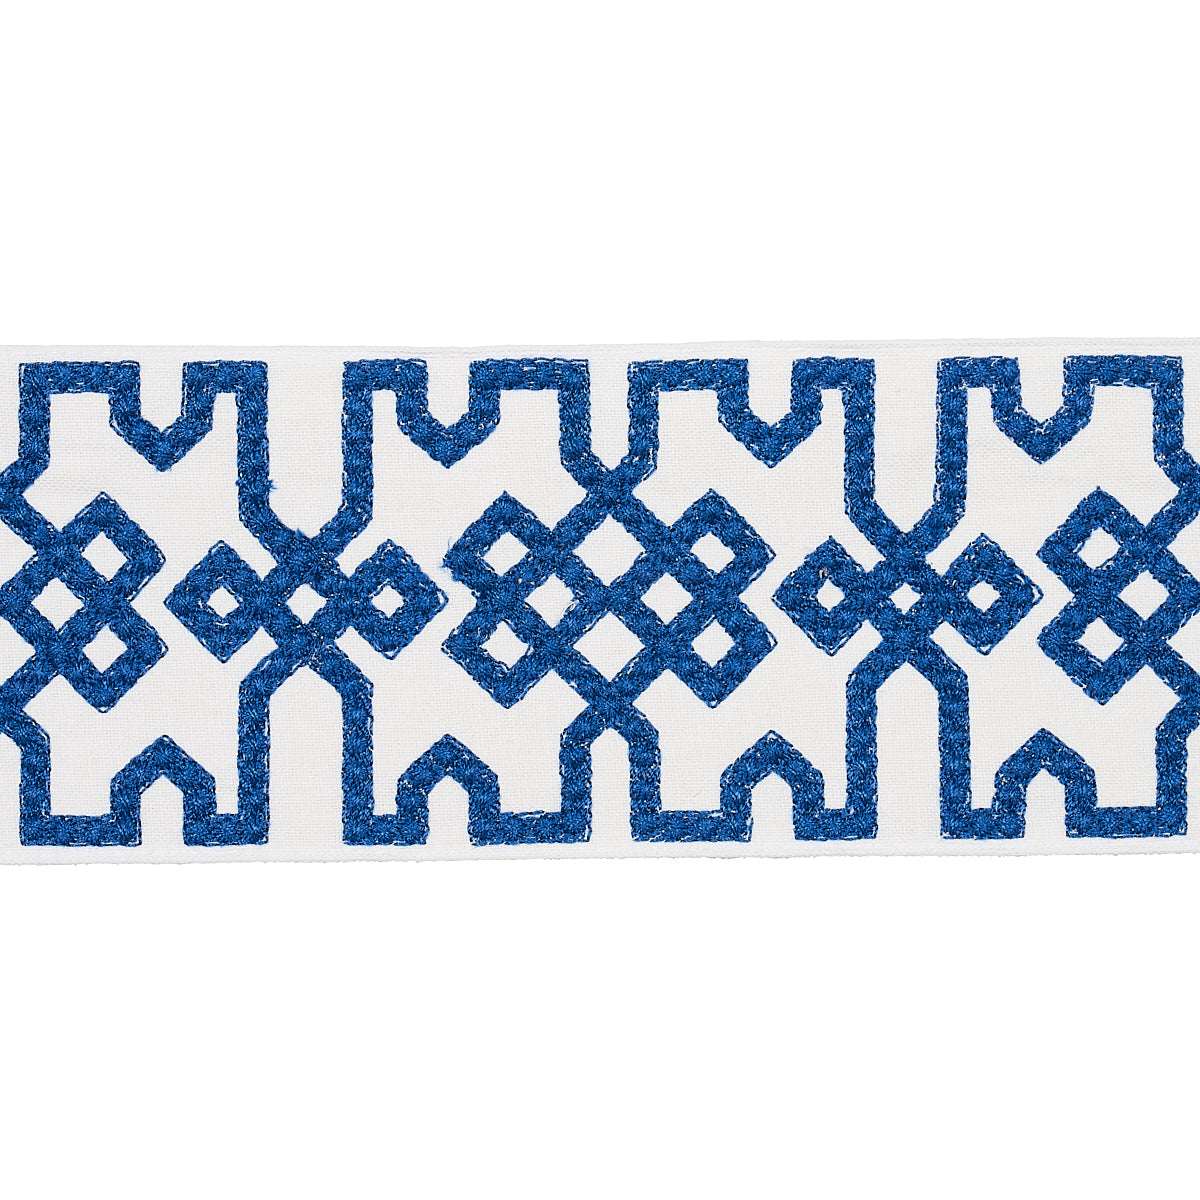 Knotted Trellis Tape   BLUE ON WHITE